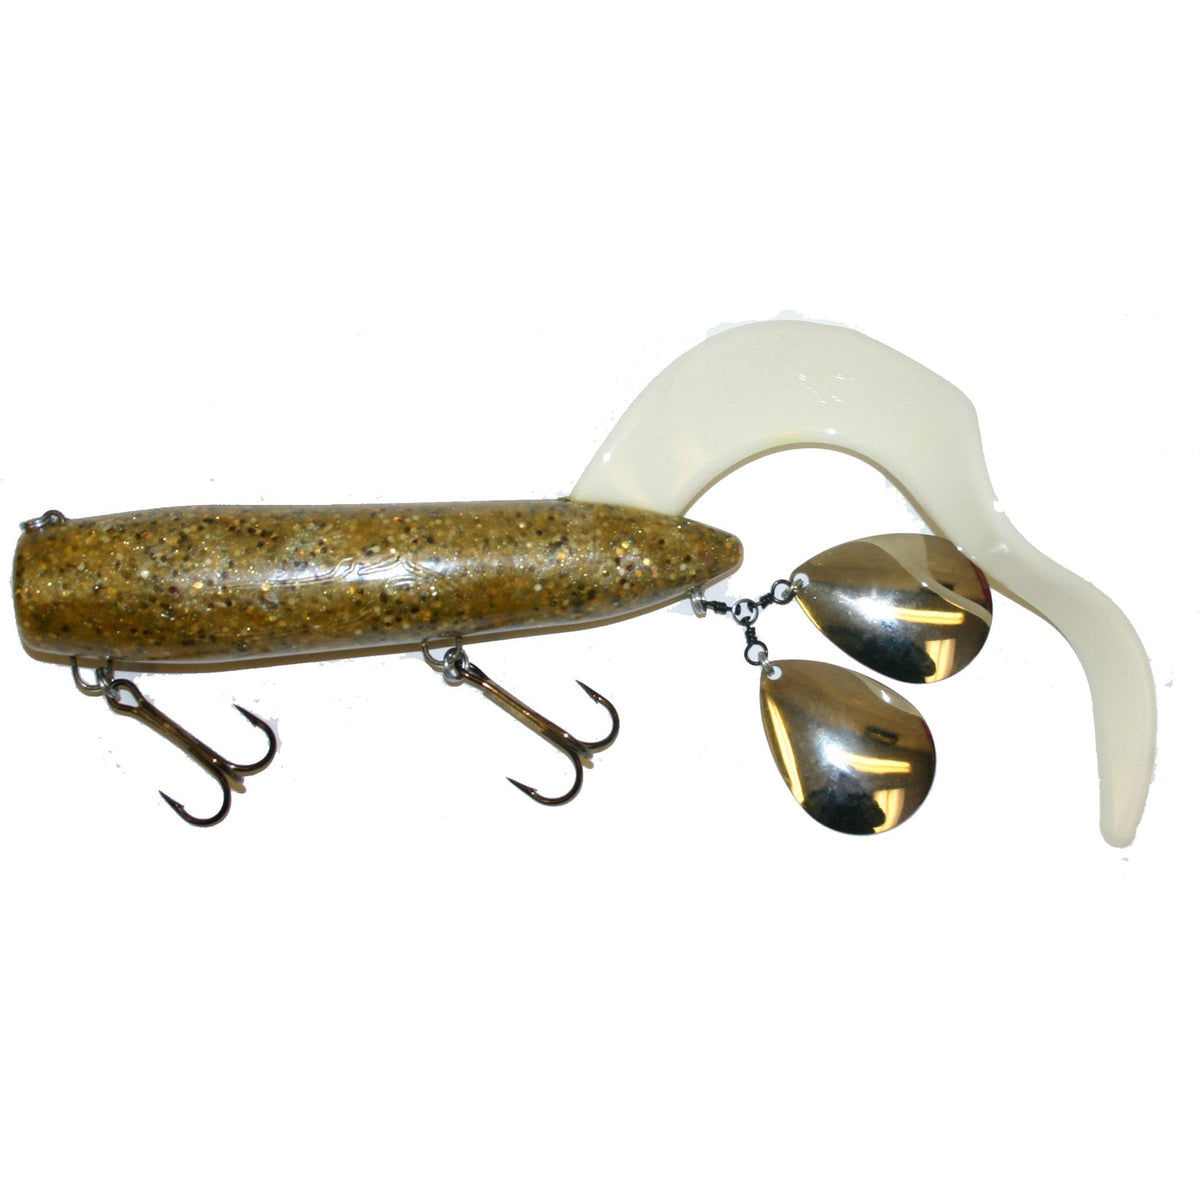 View of Rubber Bondy Bait Co. Royal Orba King Daddy Walleye available at EZOKO Pike and Musky Shop